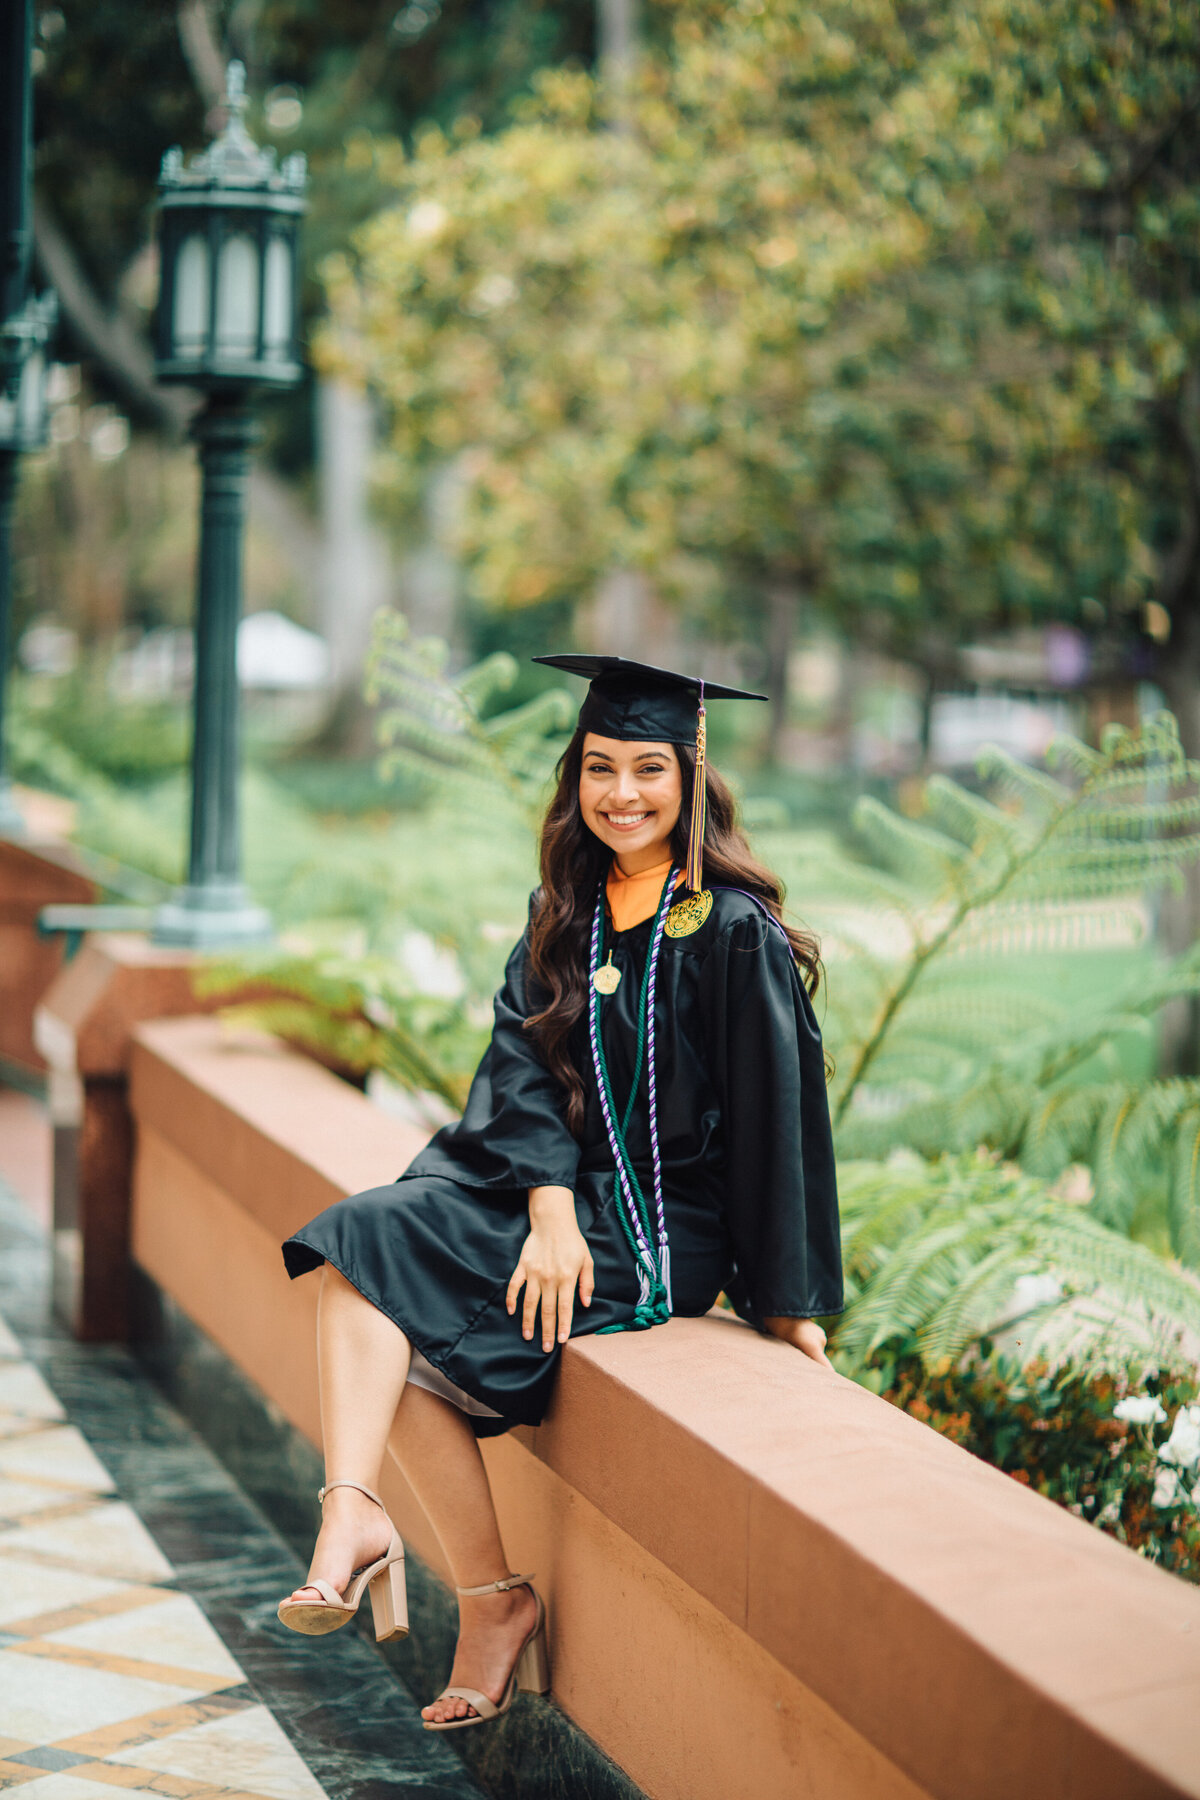 Graduation Portrait Of Young Woman In Black Toga Sitting On The Hallway Los Angeles